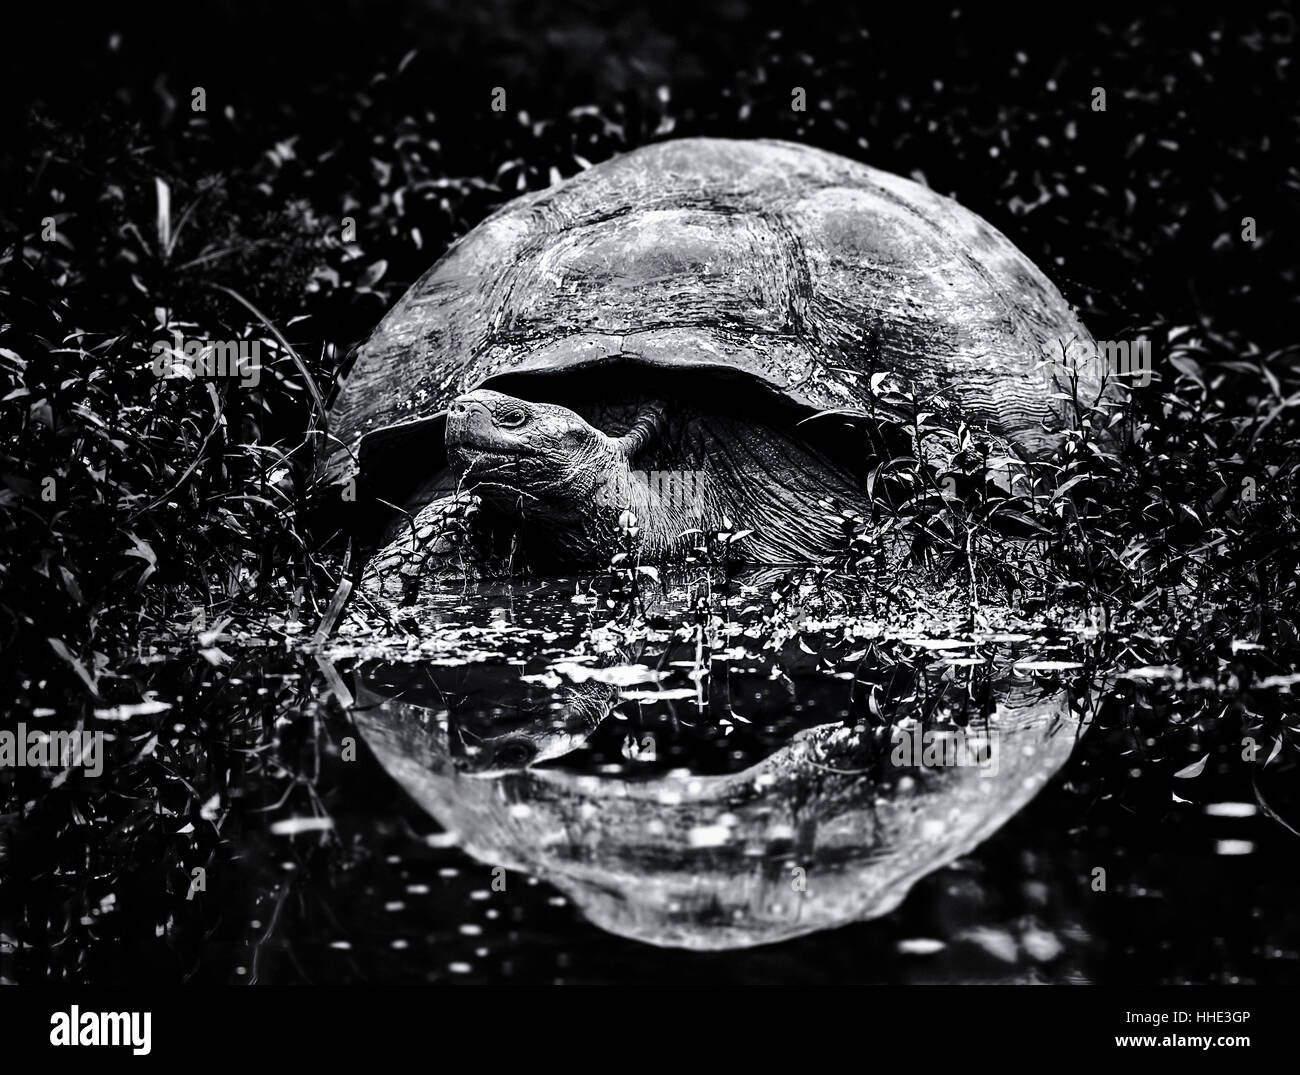 A large Galapagos tortoise approaching water, a reflection of the animal's domed shell in the surface of the water. Stock Photo